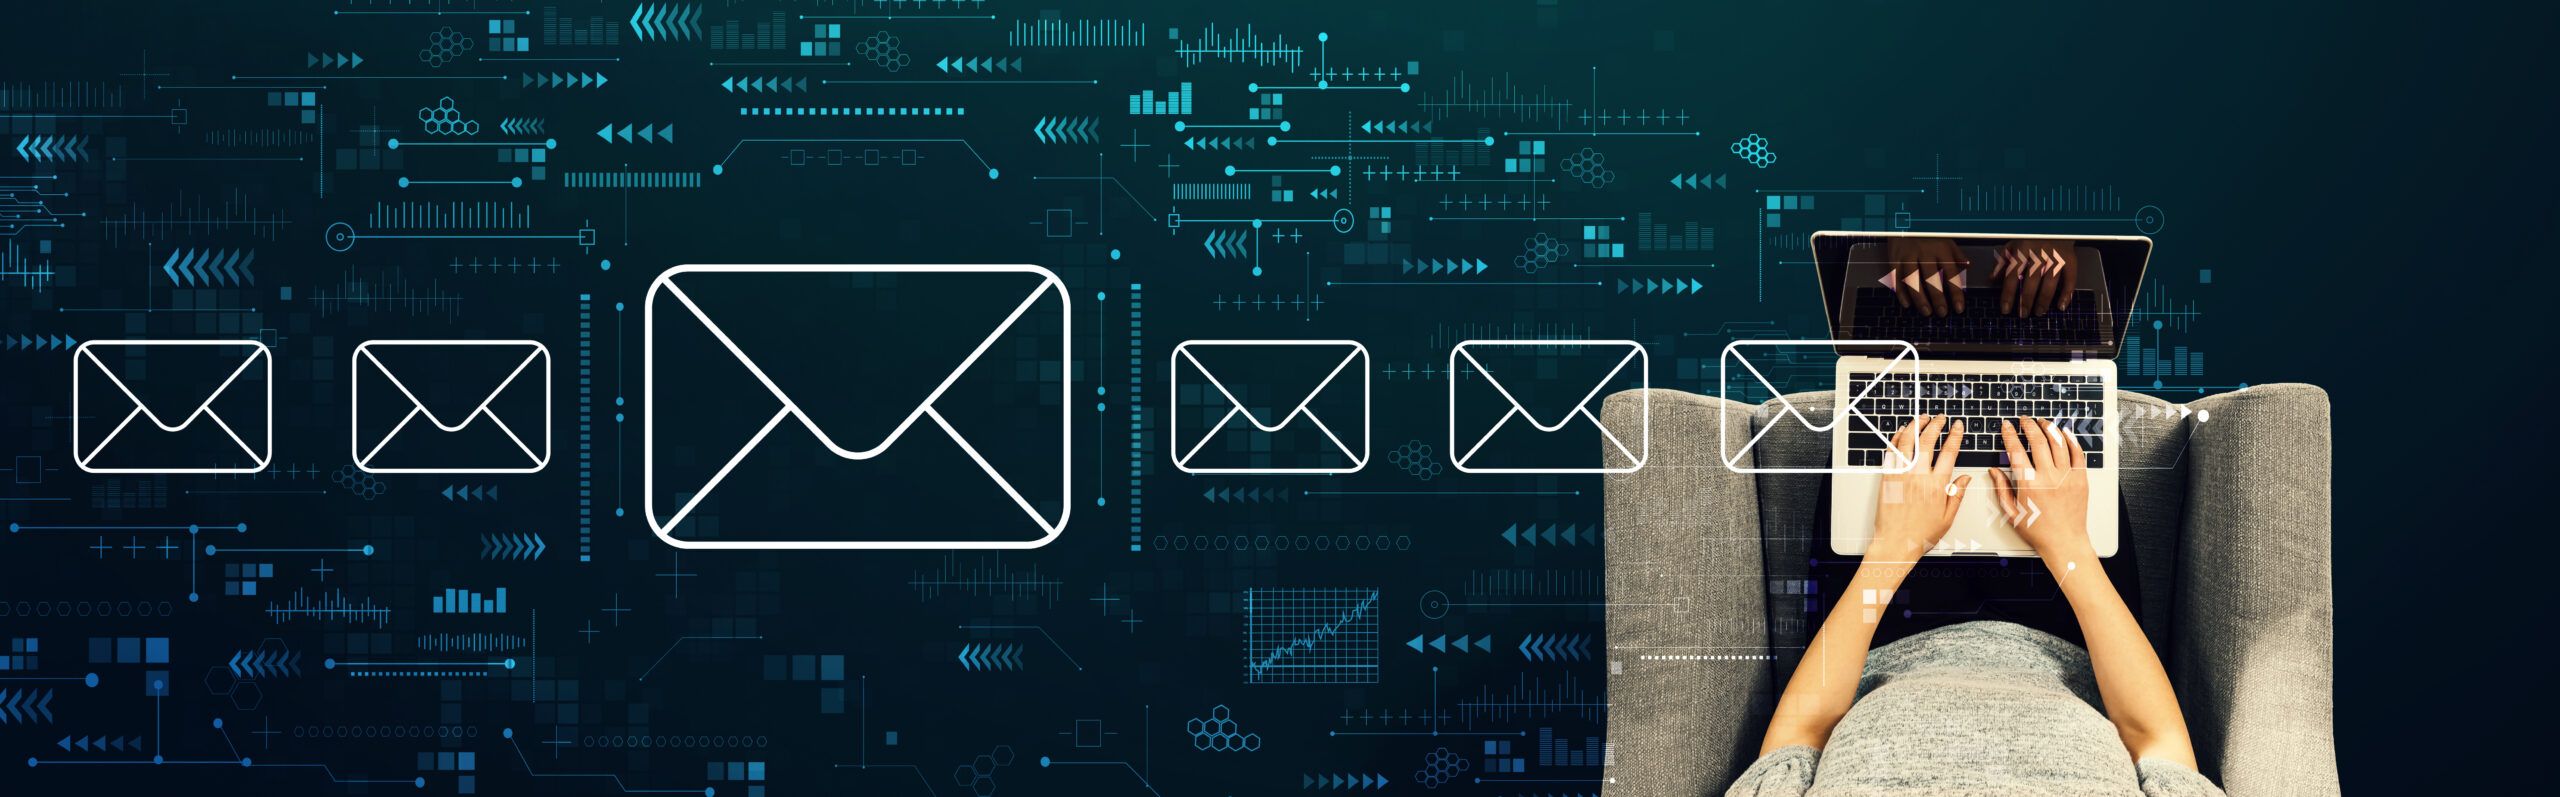 5 Reasons Small Business Owners Should Leverage Email Marketing